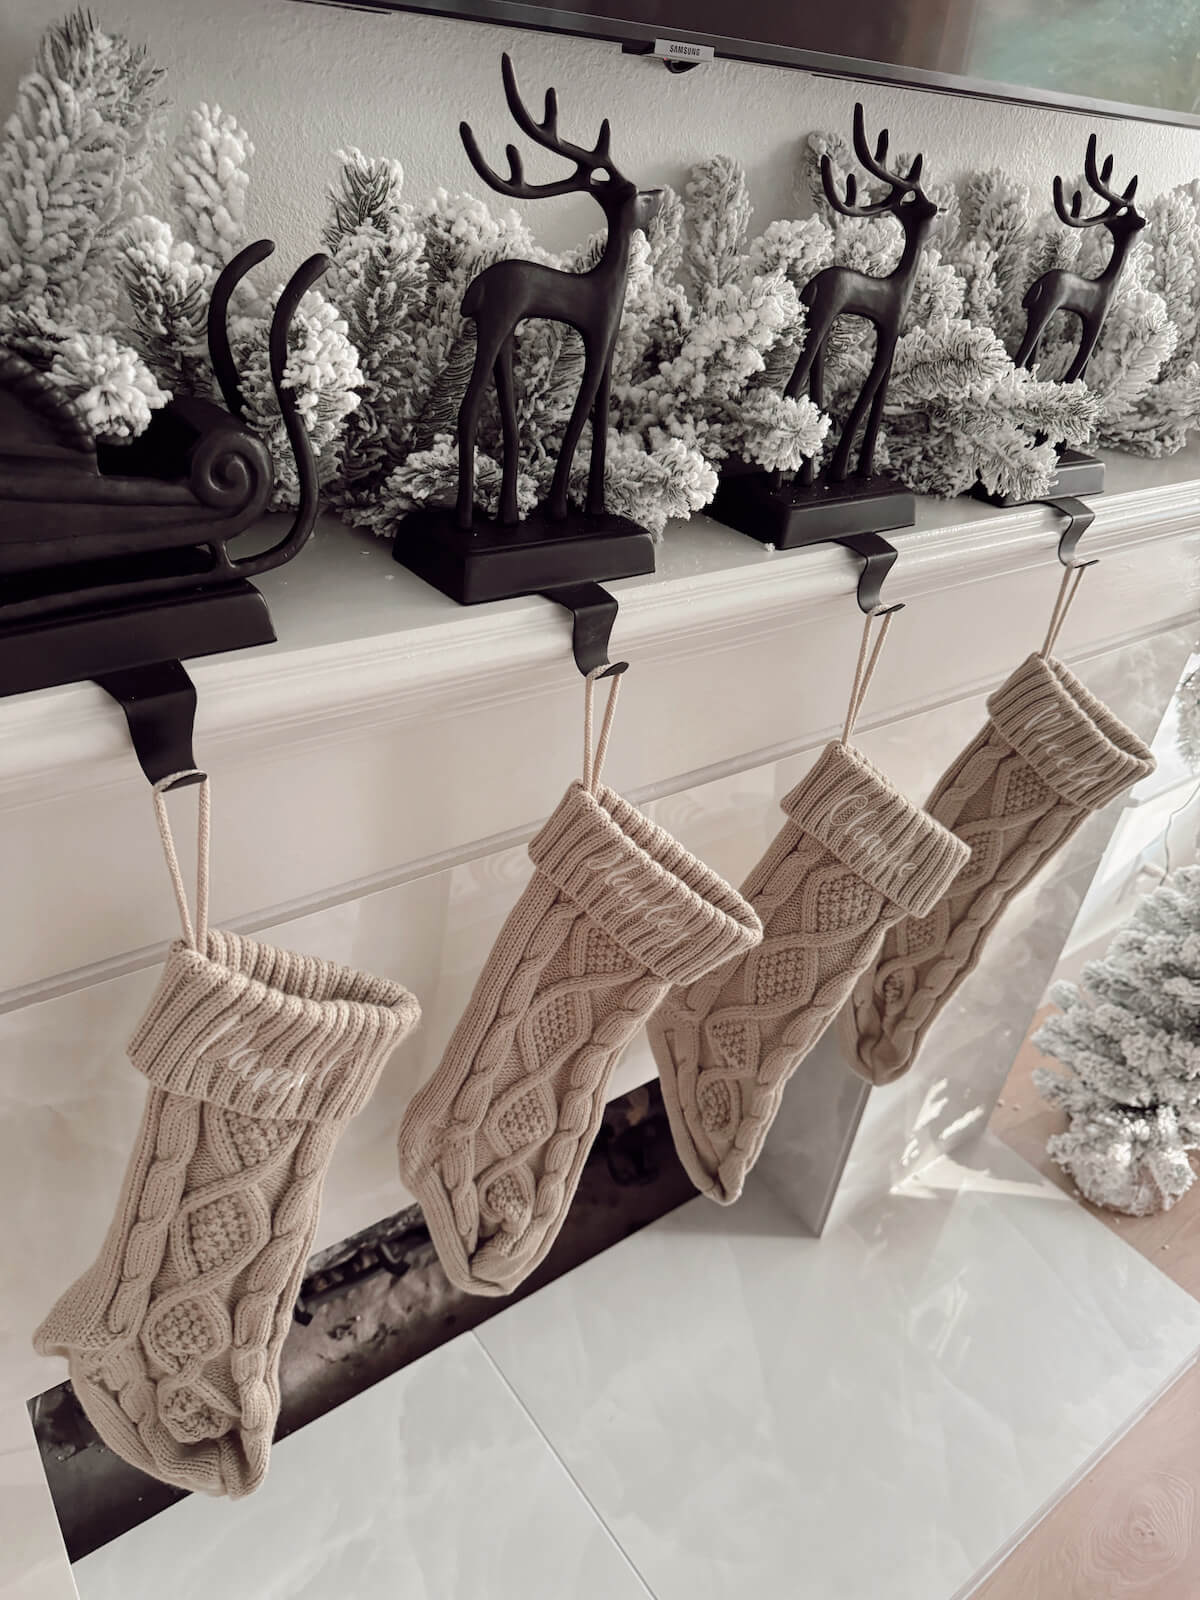 Fireplace Decor | Christmas Fireplace Mantle | Marble Fireplace | The Tile Club | Christmas Stockings 